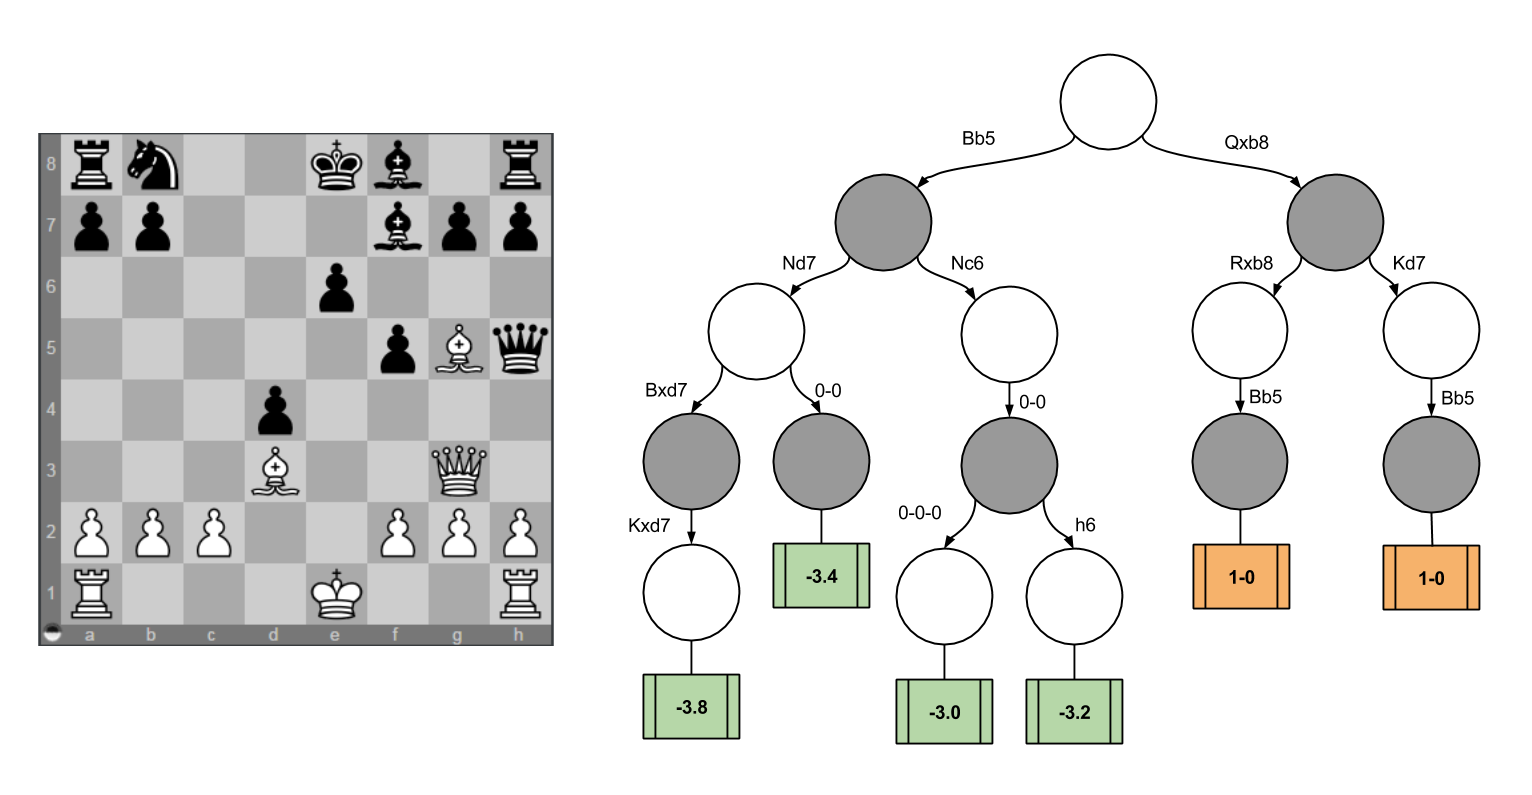 More comprehensive tree diagrams of named chess openings : r/chess